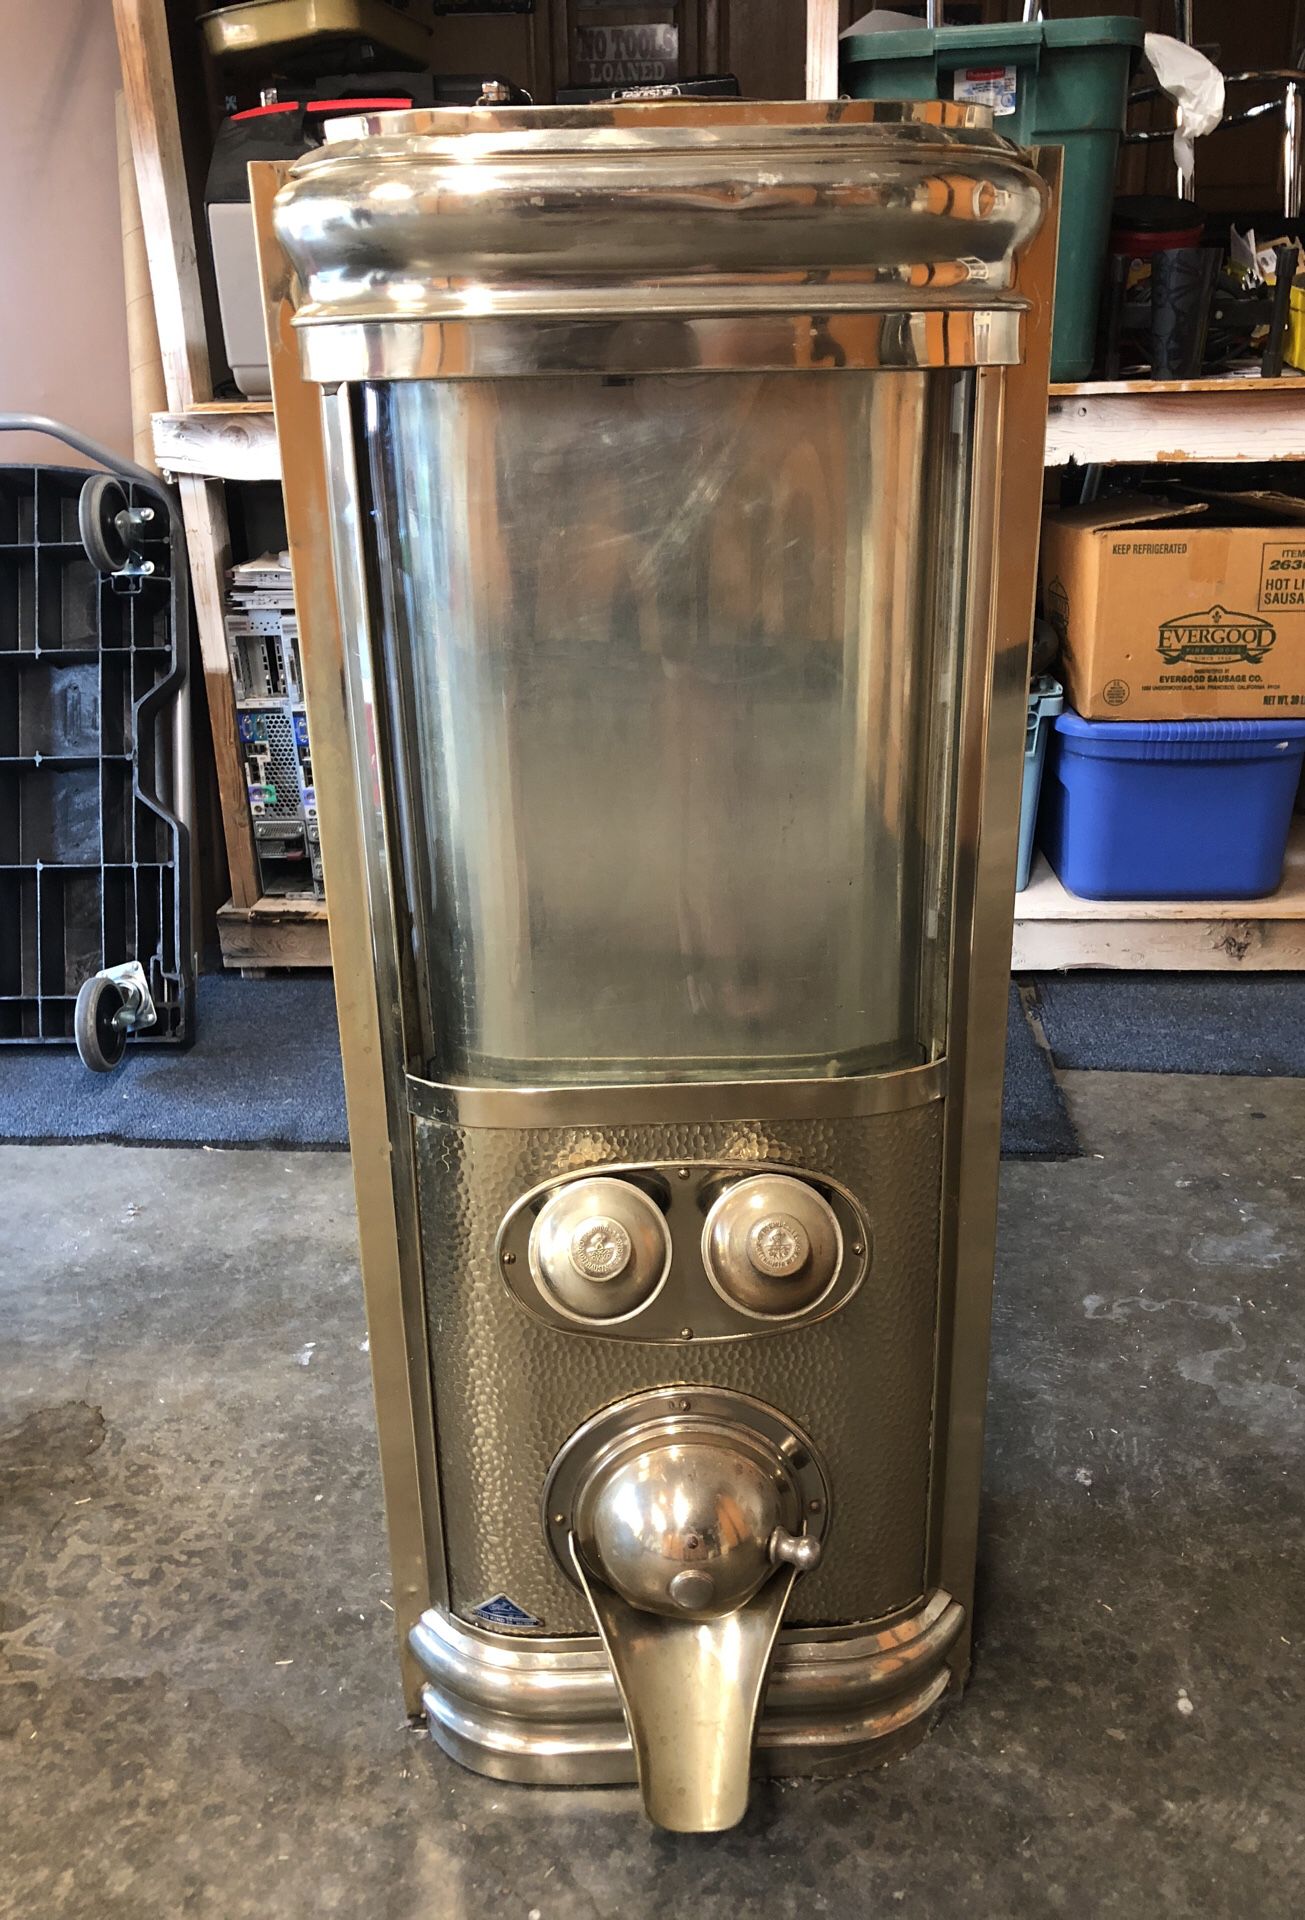 50's Style Hot Chocolate Maker for Sale in San Diego, CA - OfferUp